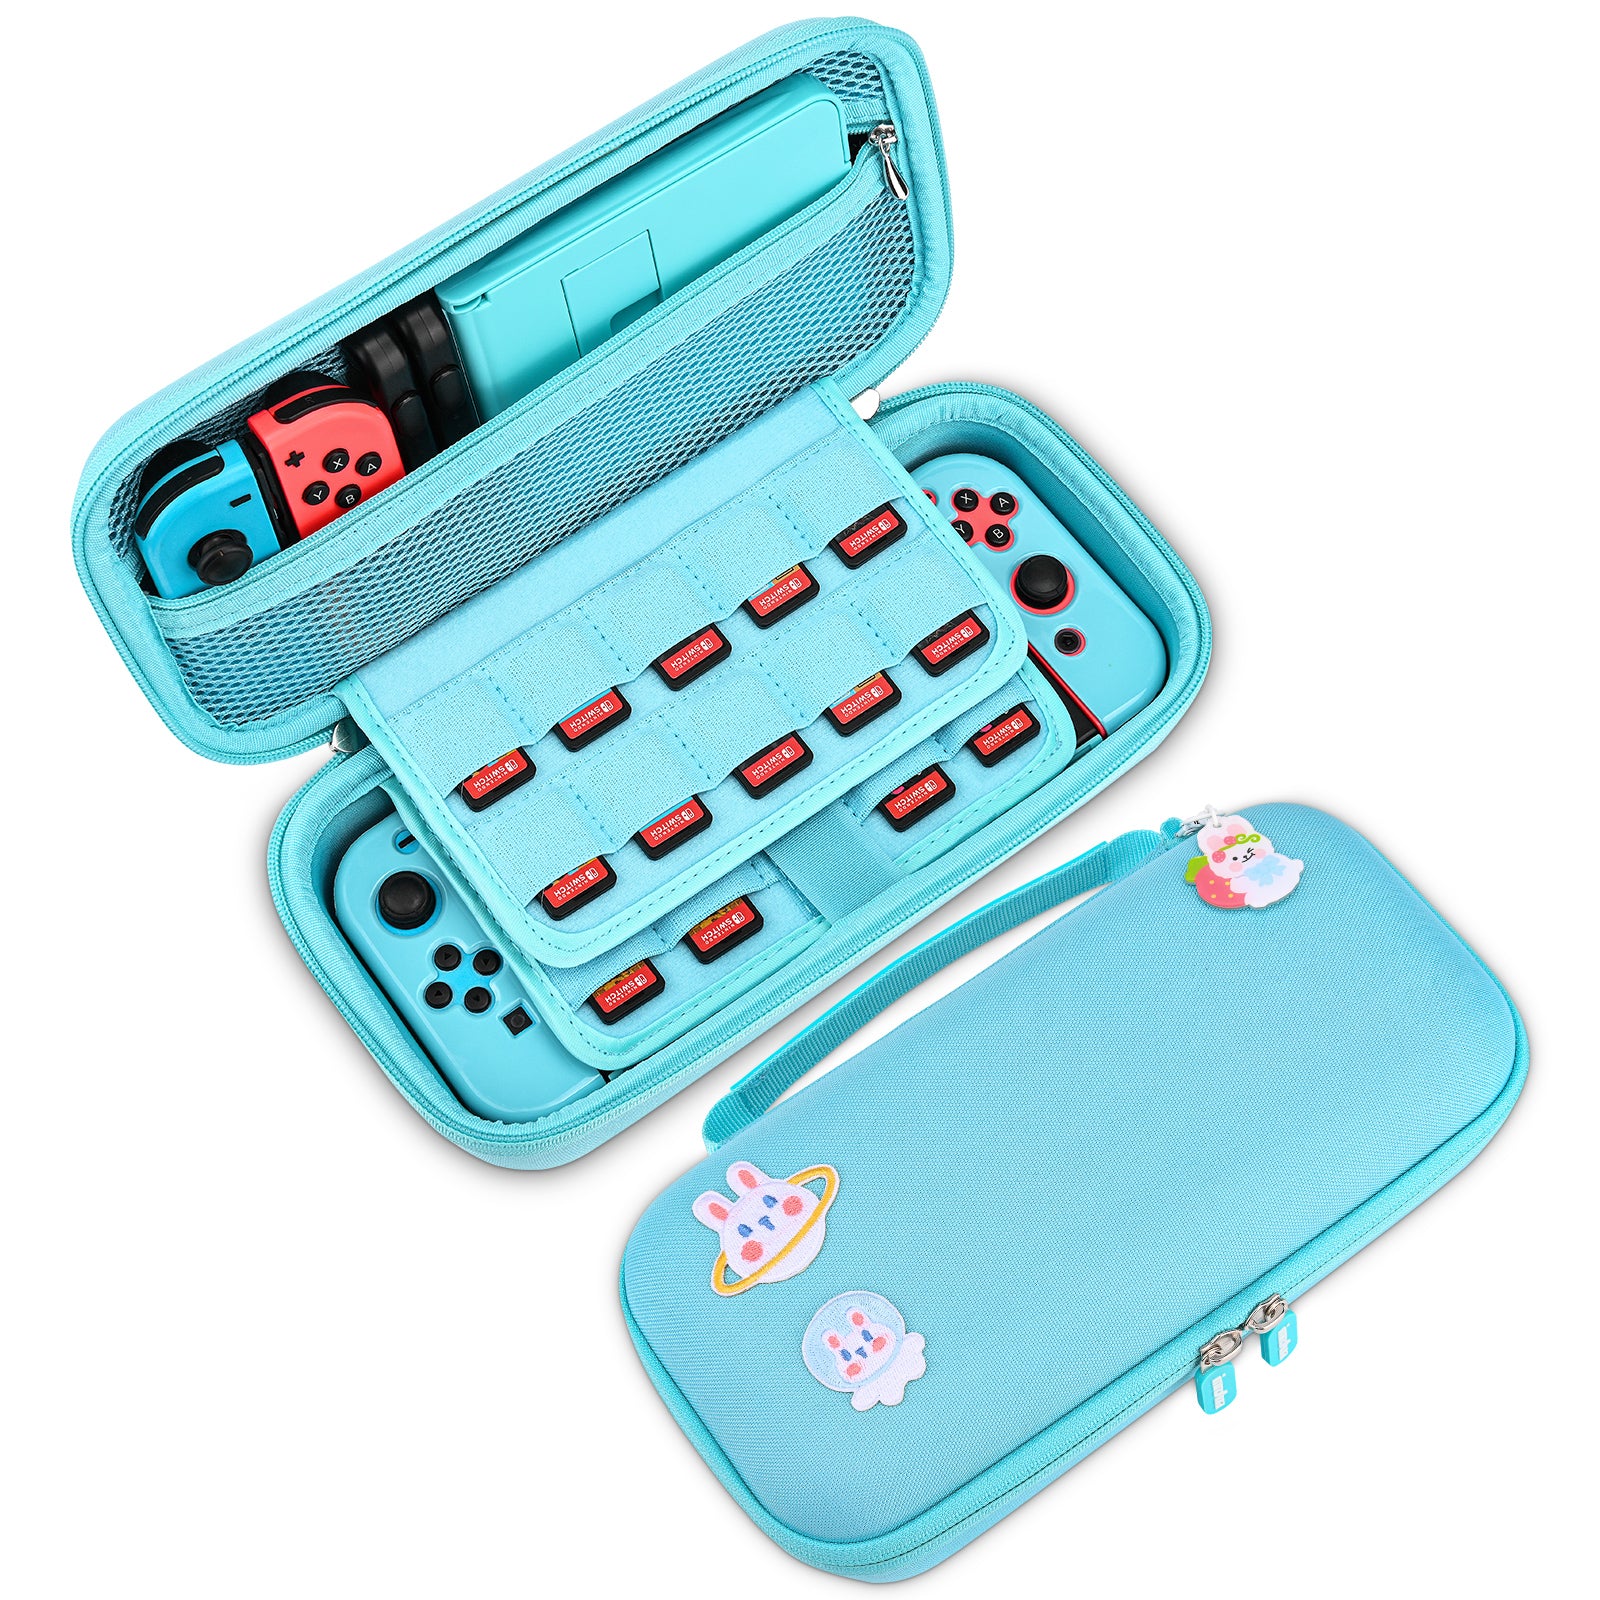 innoAura Switch Case Hard Carrying Case, for Nintendo Switch with 18 Accessories